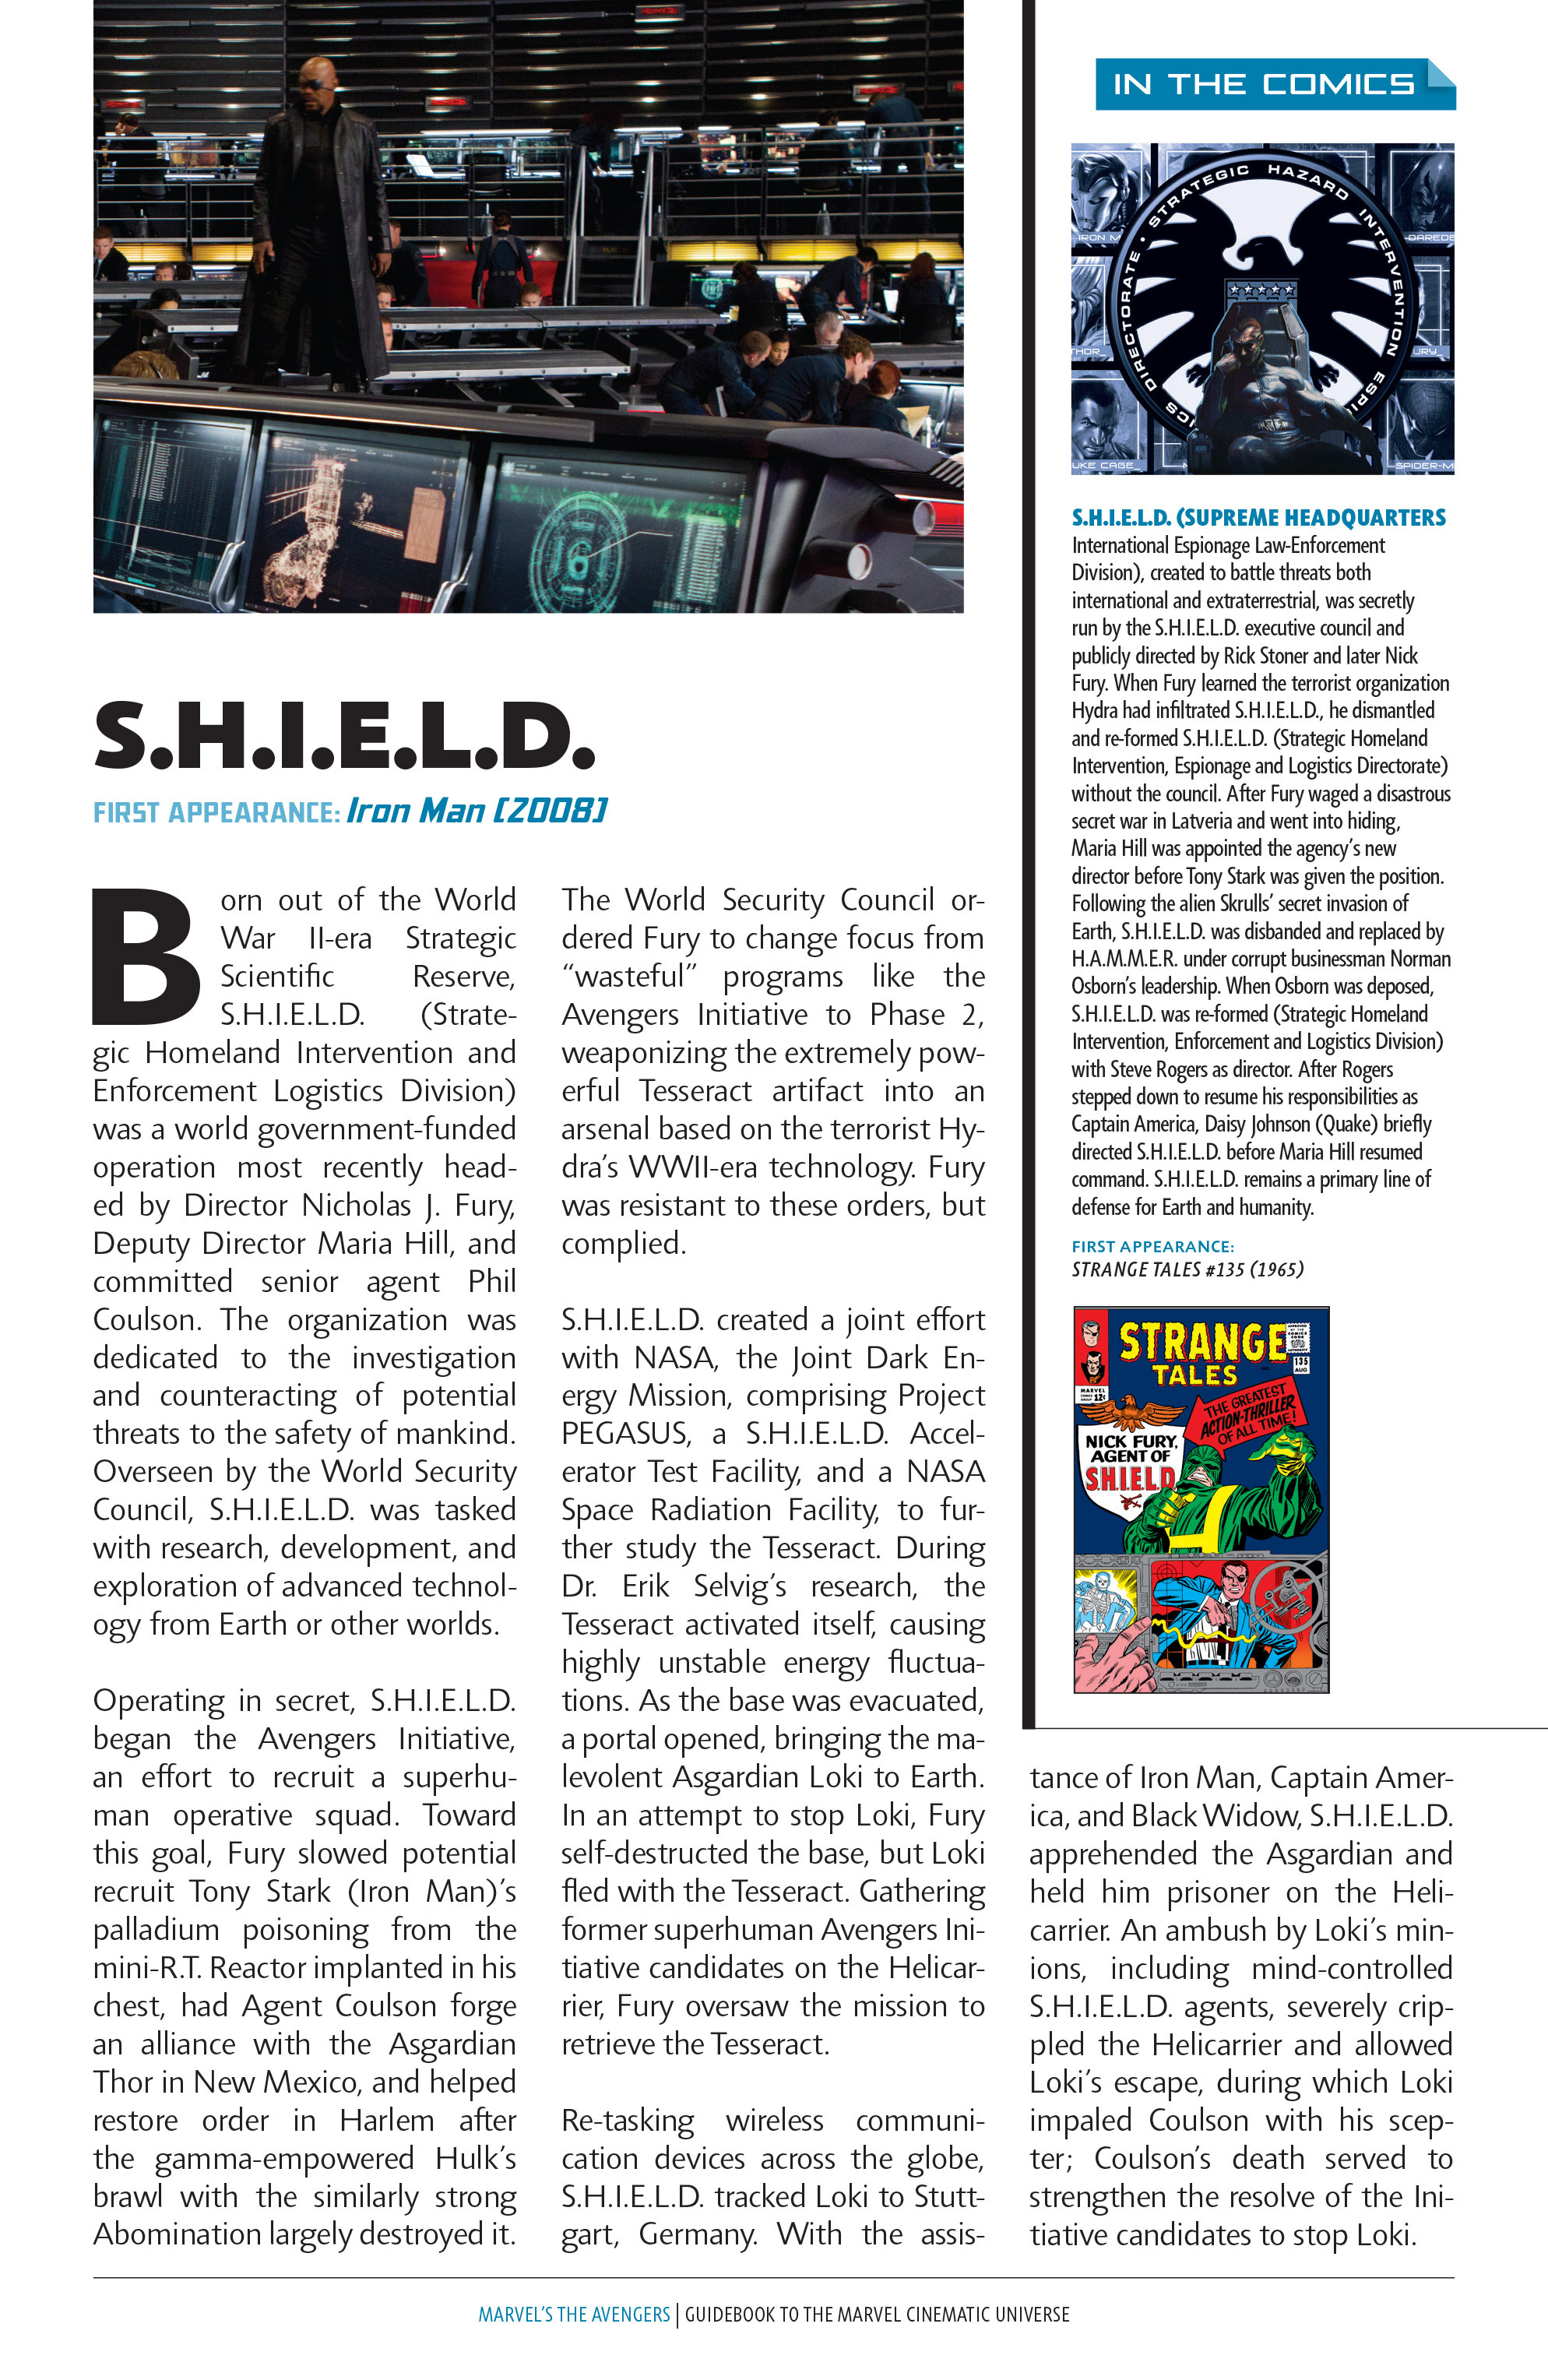 Read online Marvel Cinematic Universe Guidebook comic -  Issue # TPB 1 (Part 2) - 48